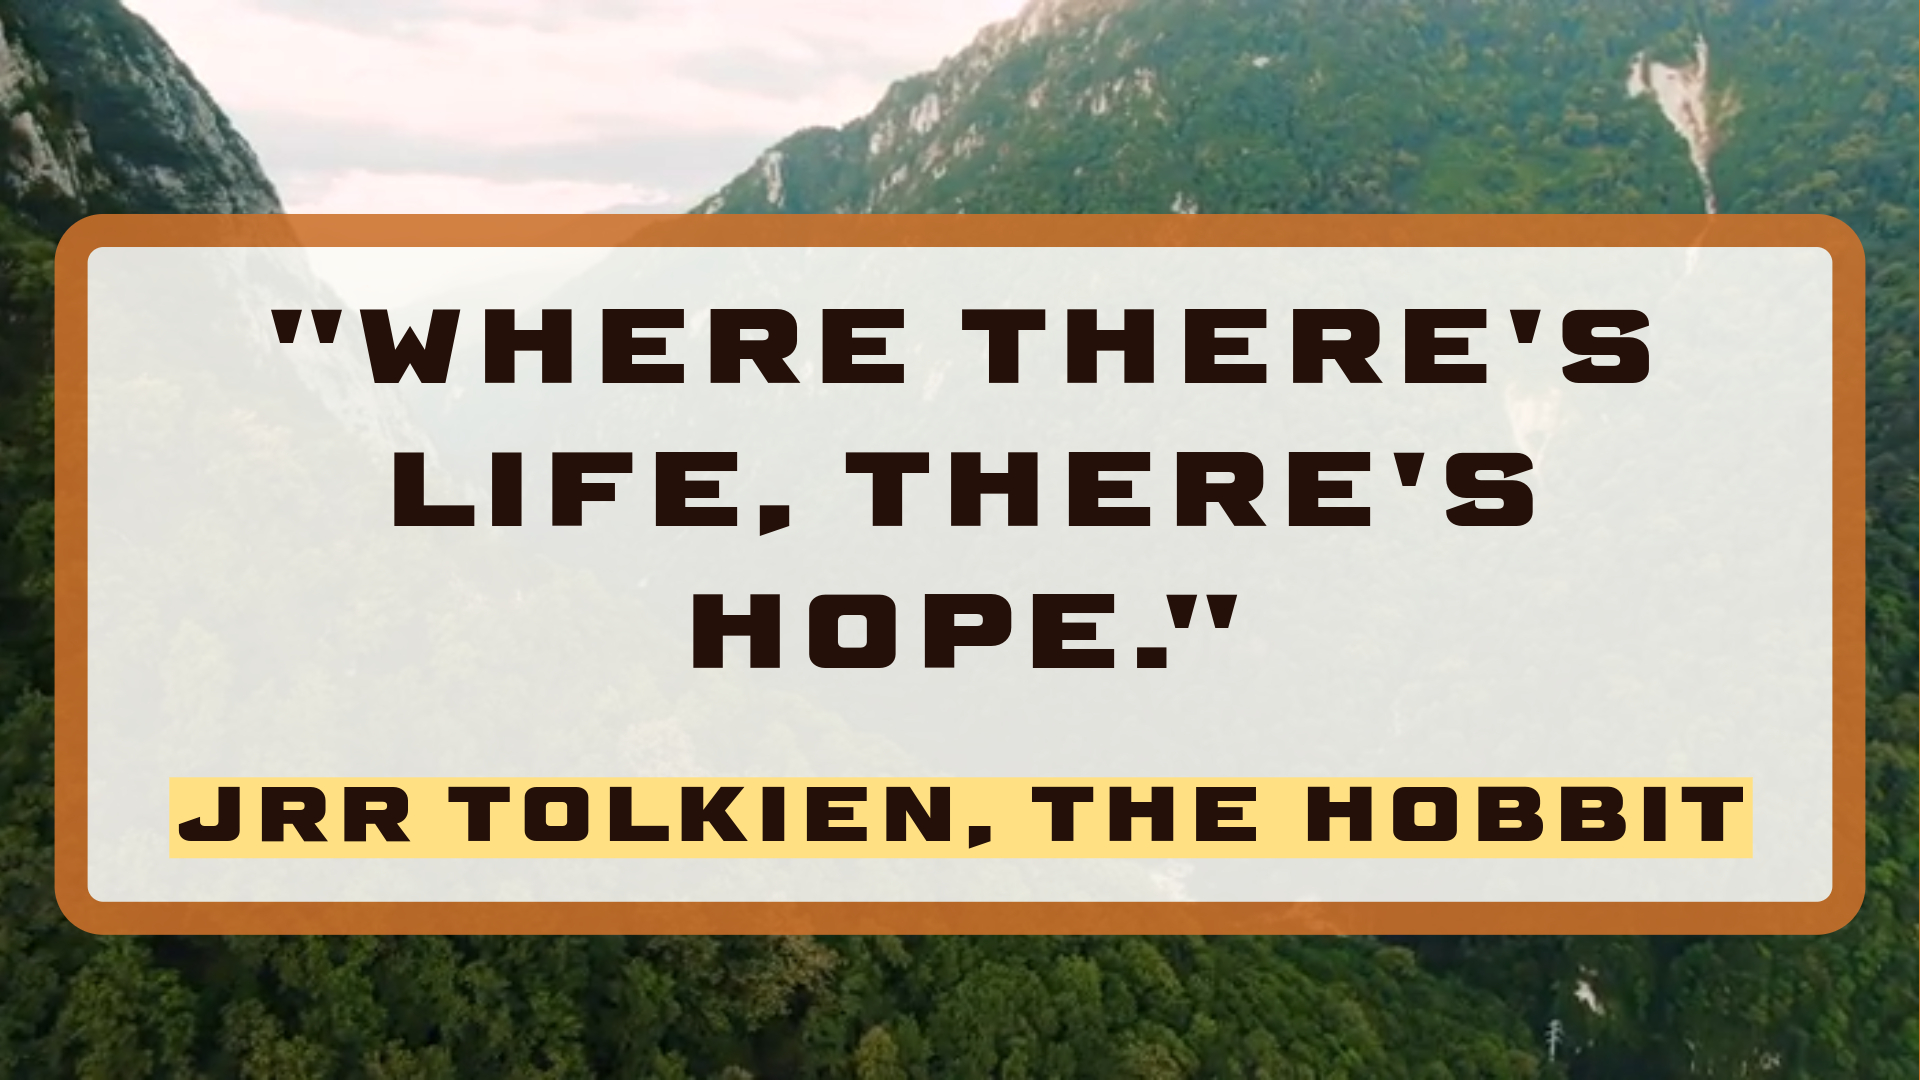 Quotes to Live By: JRR Tolkien